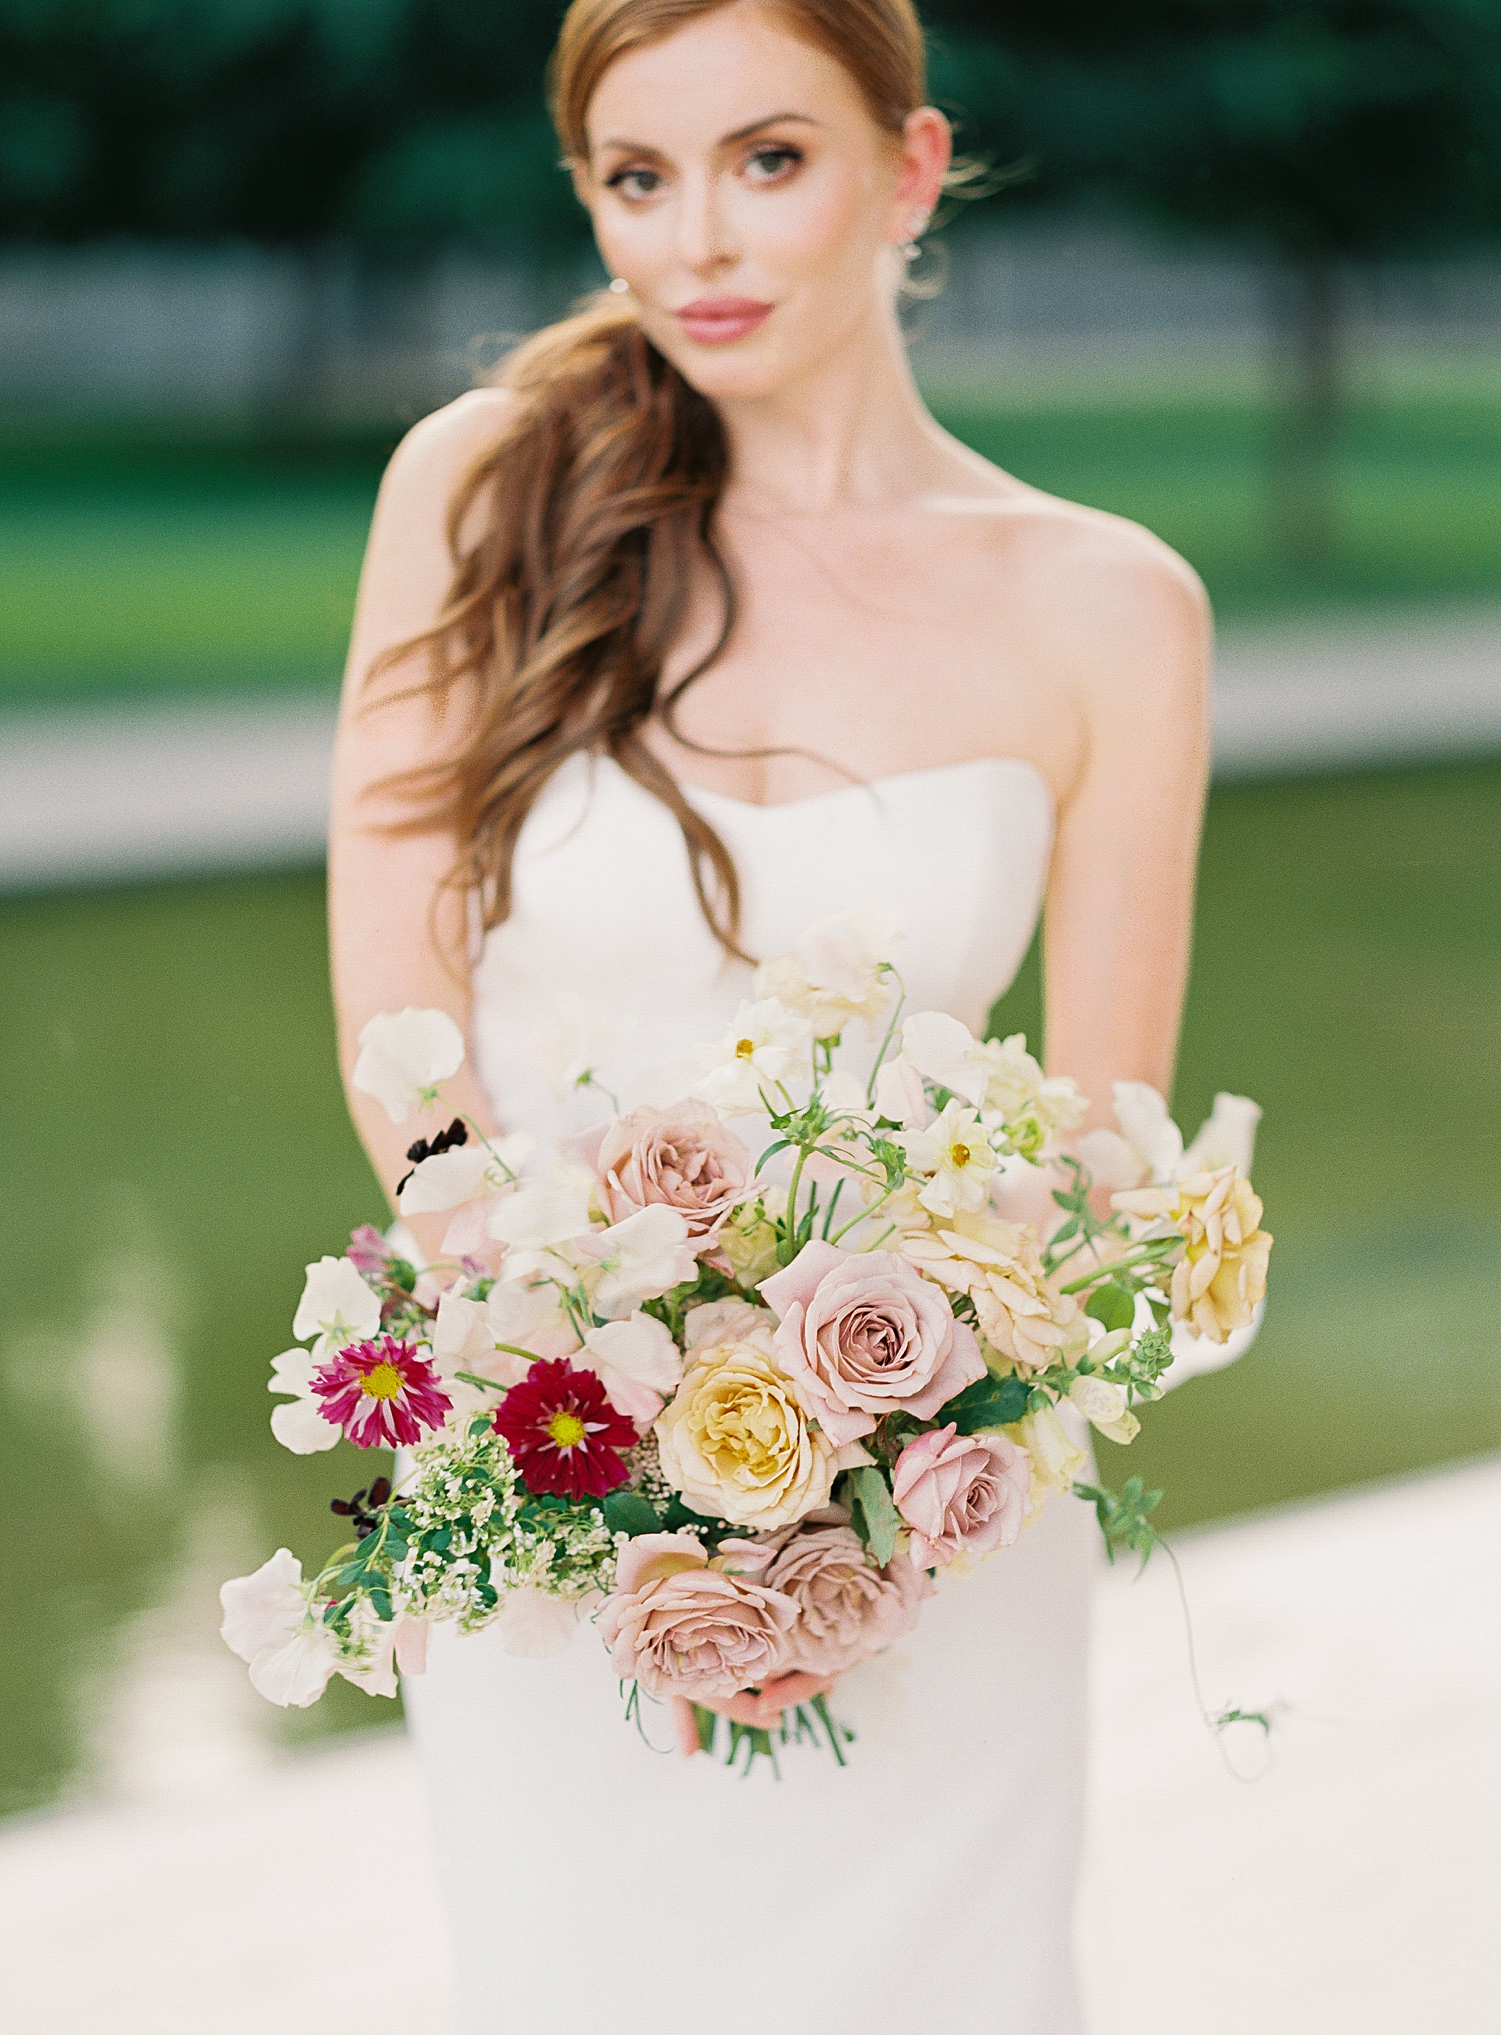 red headed girl in white wedding gown holding colorful bridal bouquet